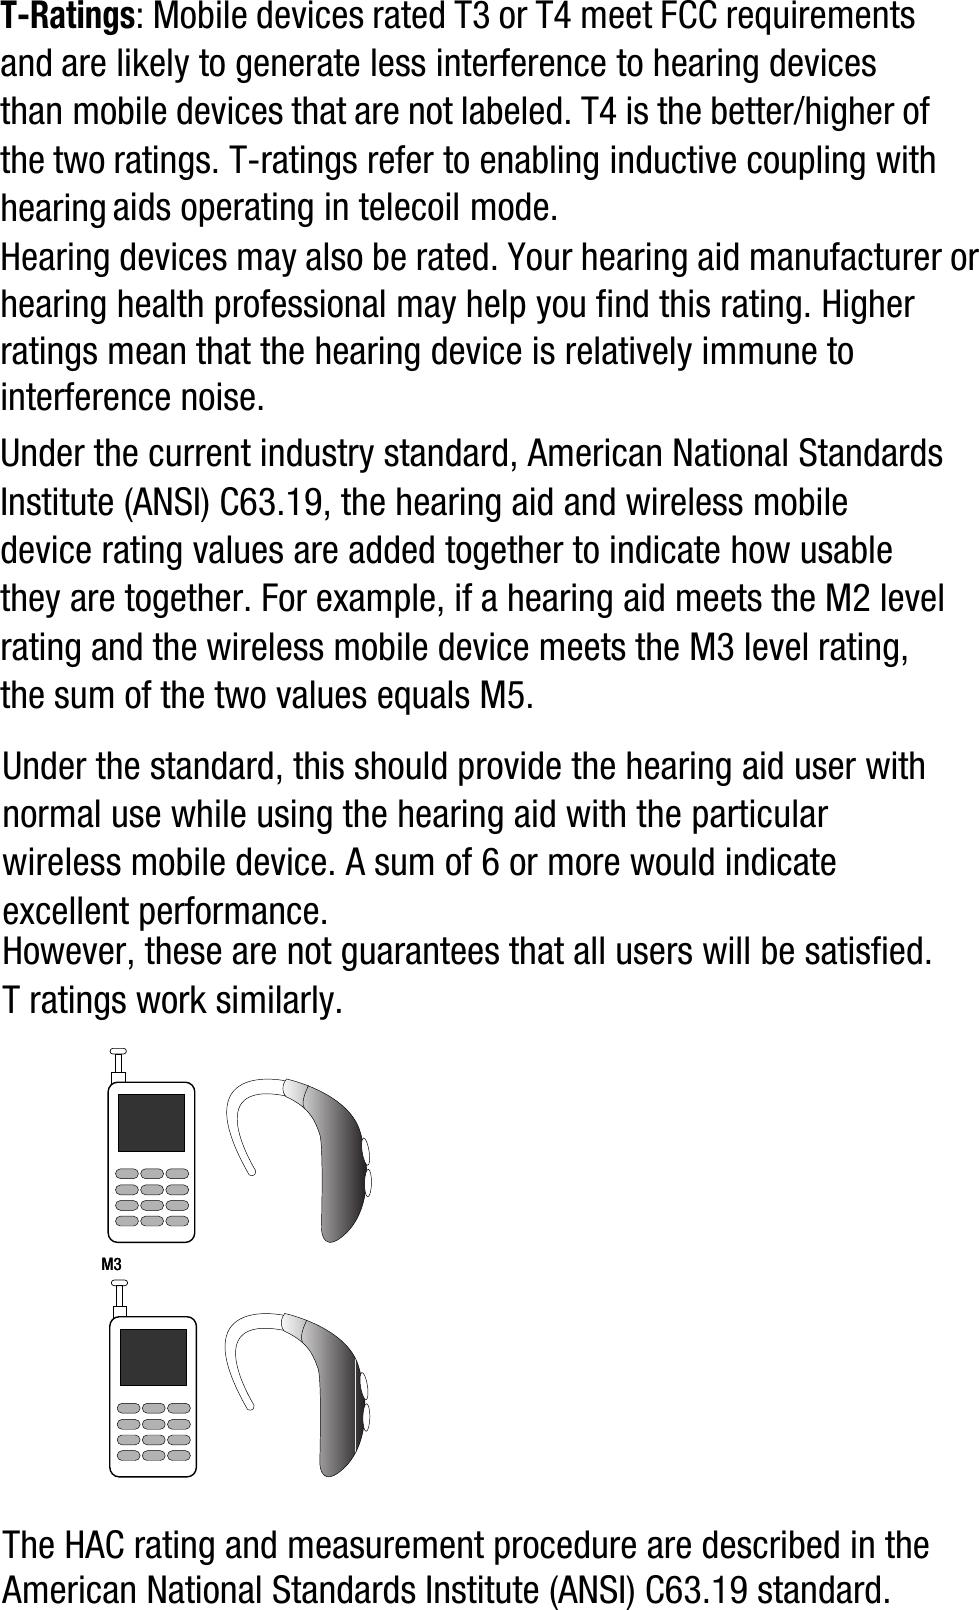 T-Ratings: Mobile devices rated T3 or T4 meet FCC requirements and are likely to generate less interference to hearing devices than mobile devices that are not labeled. T4 is the better/higher of the two ratings. T-ratings refer to enabling inductive coupling with hearing aids operating in telecoil mode.Hearing devices may also be rated. Your hearing aid manufacturer or hearing health professional may help you find this rating. Higher ratings mean that the hearing device is relatively immune to interference noise. Under the current industry standard, American National Standards Institute (ANSI) C63.19, the hearing aid and wireless mobile device rating values are added together to indicate how usable they are together. For example, if a hearing aid meets the M2 level rating and the wireless mobile device meets the M3 level rating, the sum of the two values equals M5. Under the standard, this should provide the hearing aid user with normal use while using the hearing aid with the particular wireless mobile device. A sum of 6 or more would indicate excellent performance.  However, these are not guarantees that all users will be satisfied. T ratings work similarly.The HAC rating and measurement procedure are described in the American National Standards Institute (ANSI) C63.19 standard.    M3       M3        